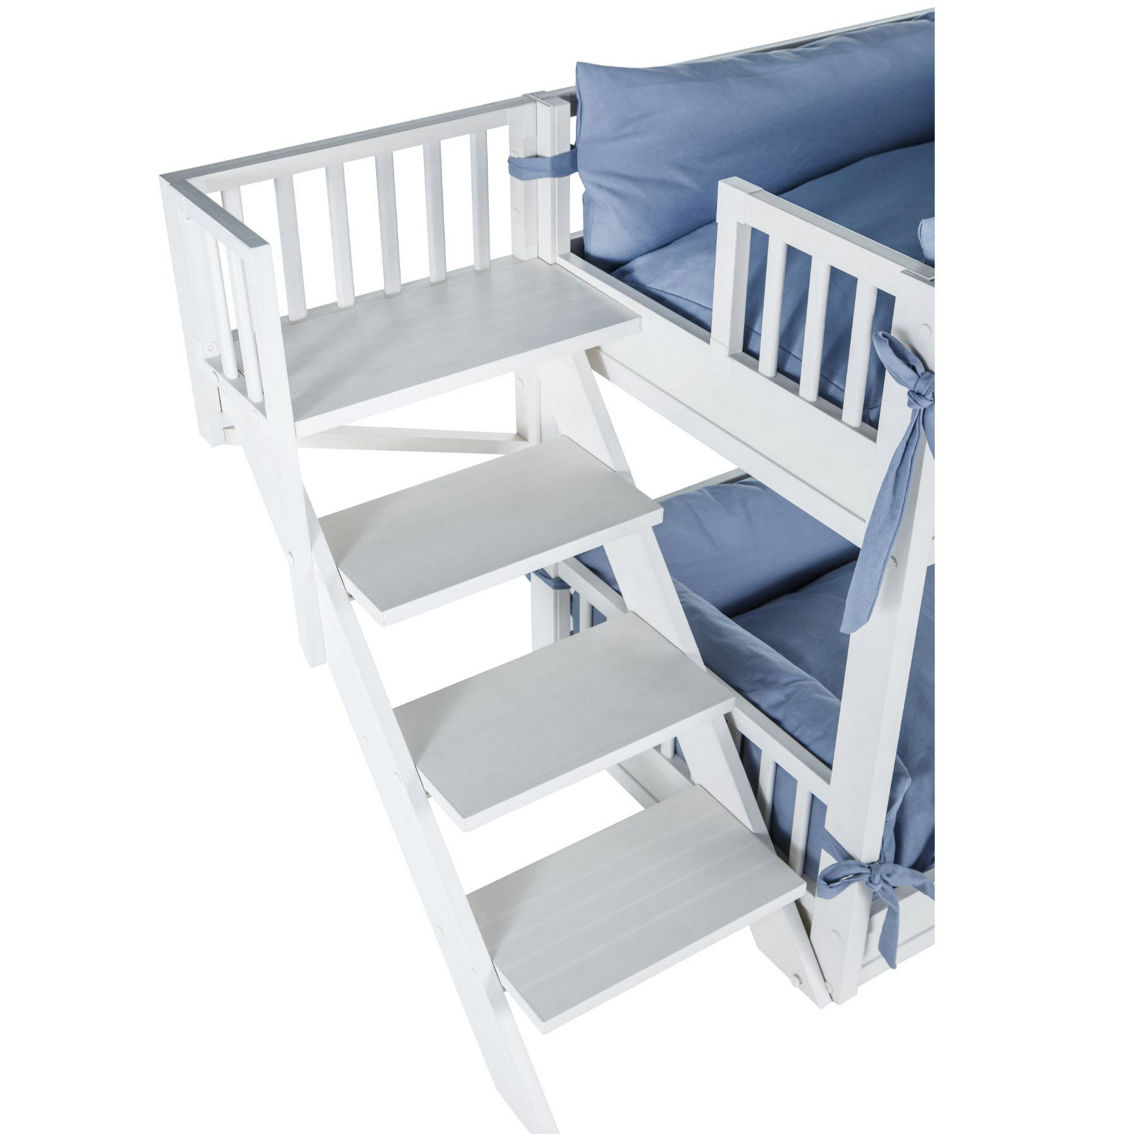 New Age Pet® ECOFLEX® Dog Bunk Bed with Removable Cushions - Grey - Image 5 of 5